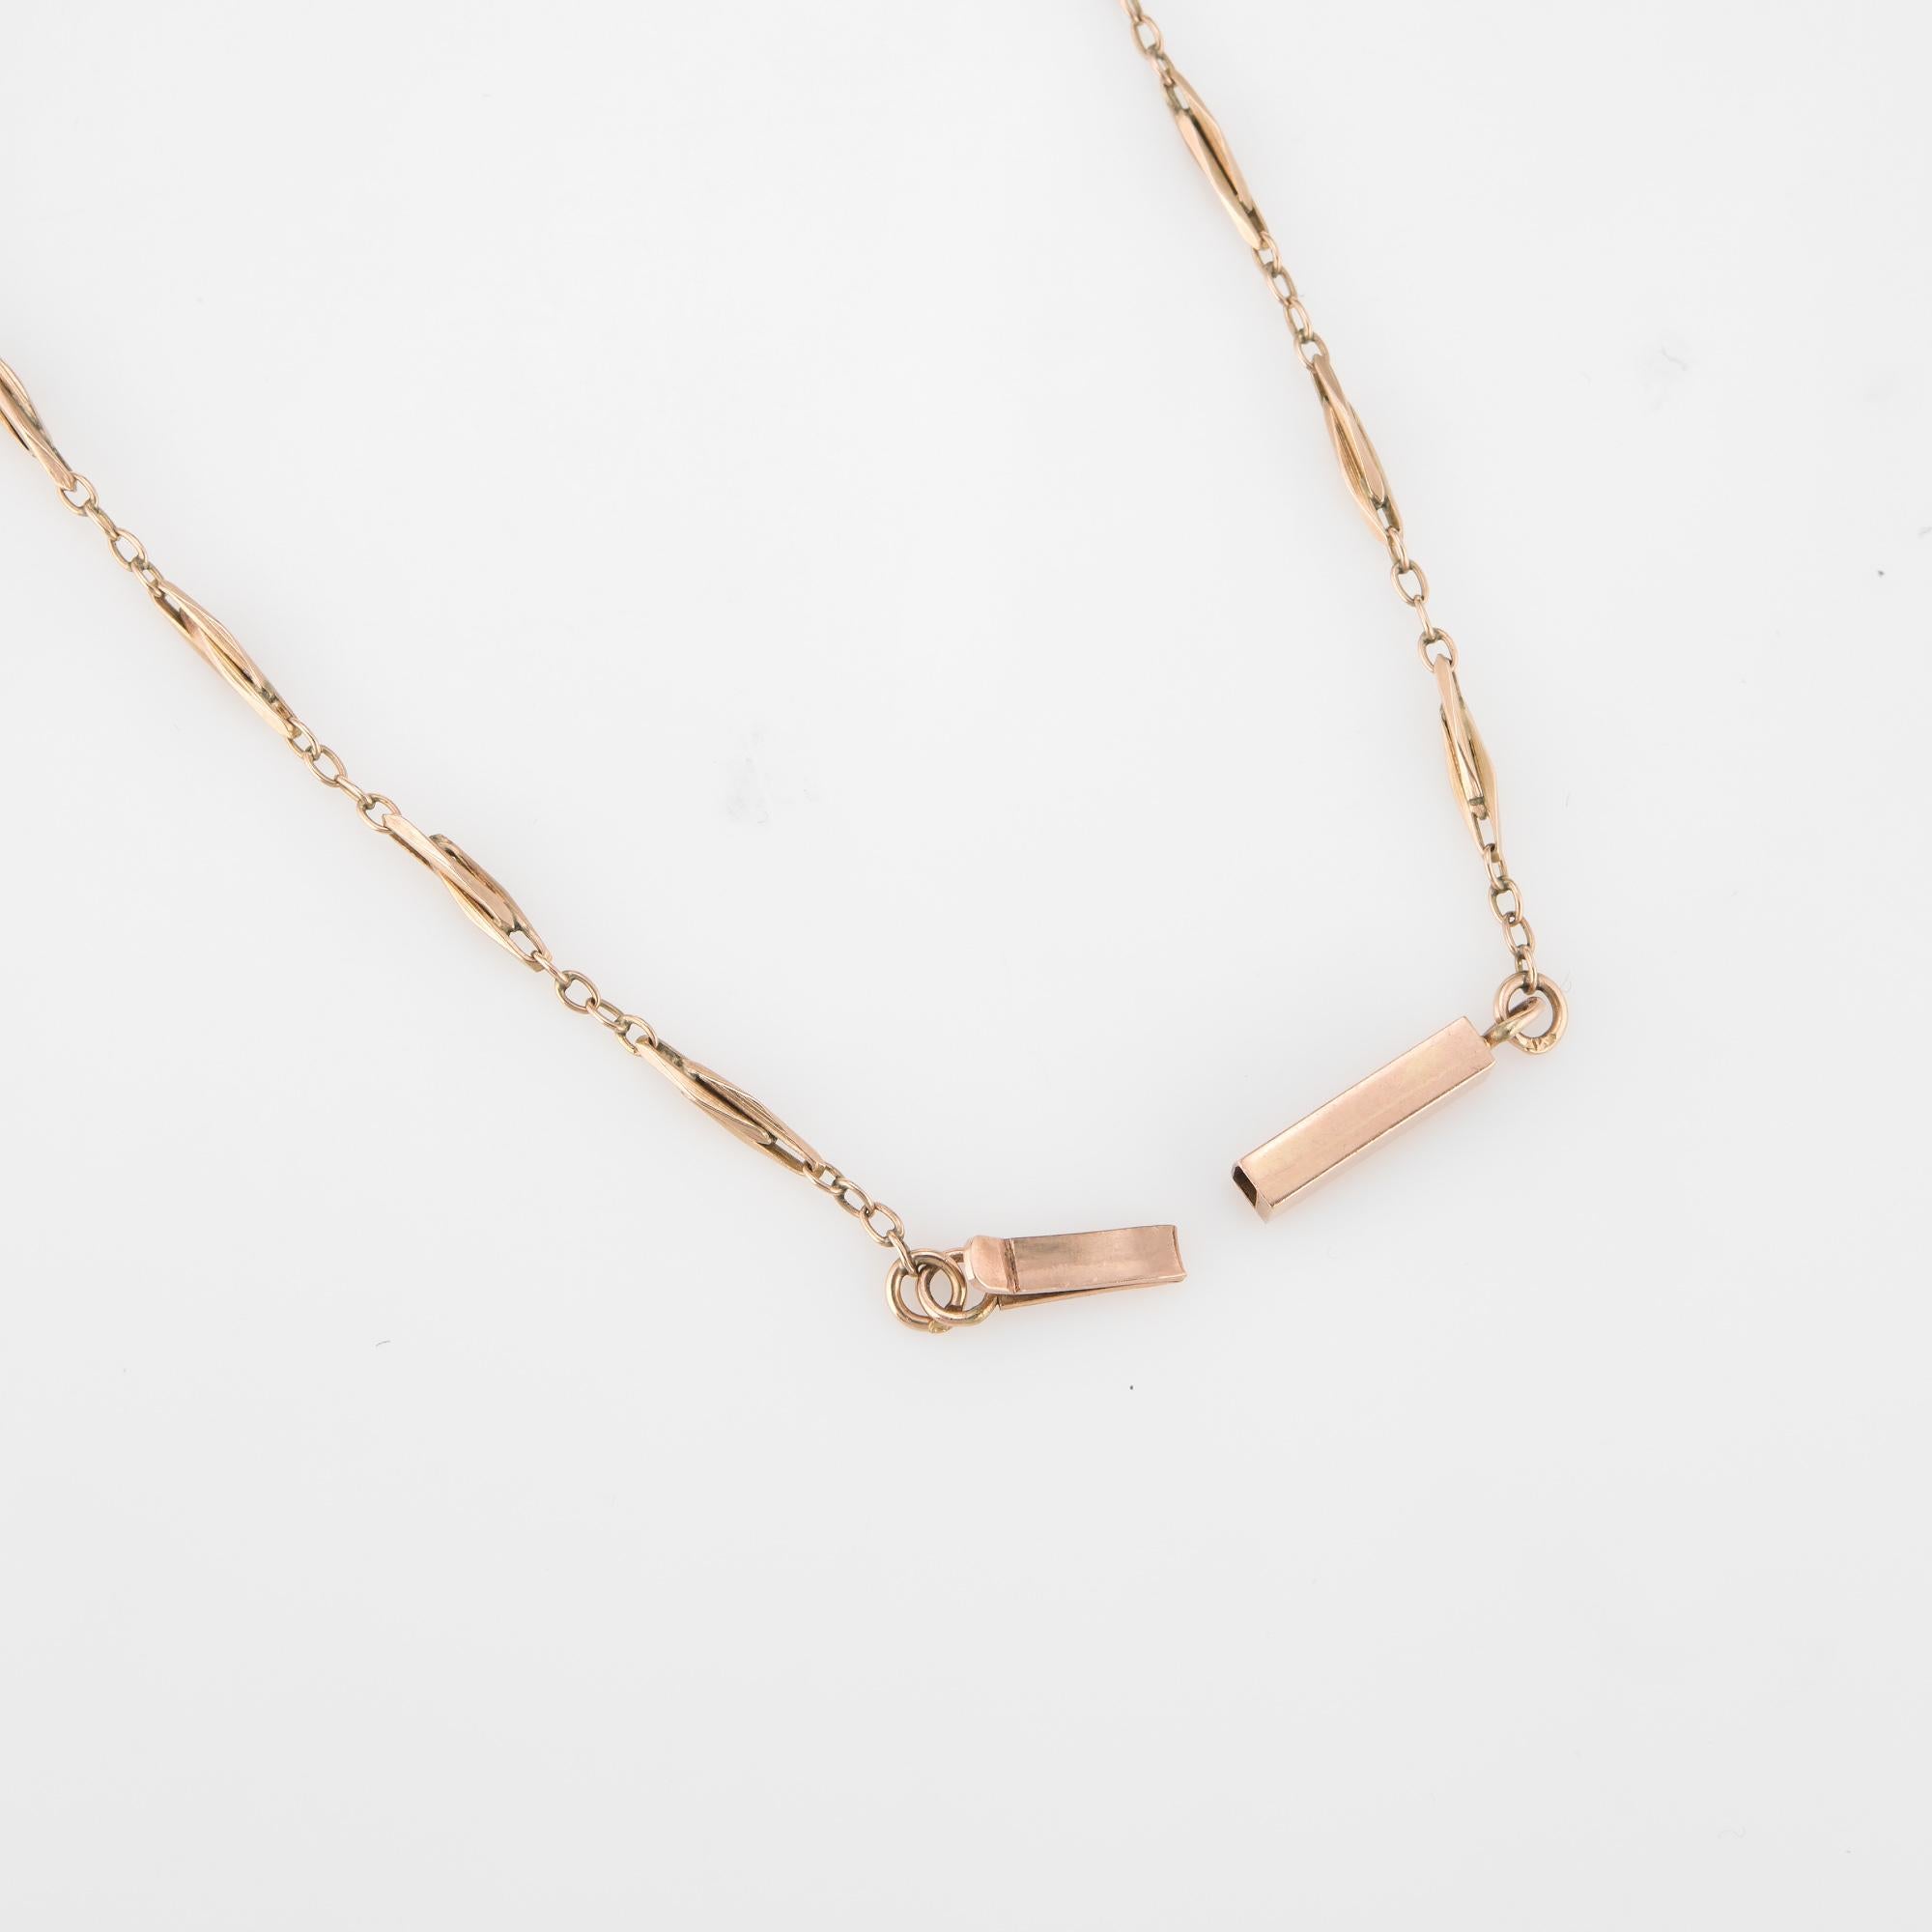 Elegant and finely detailed vintage necklace (circa 1940s to 1950s) crafted in 14 karat rose gold.  

The necklace measures 25 inches in length and sits nicely below the nape of the necklace. The interlocking links are further supported with two